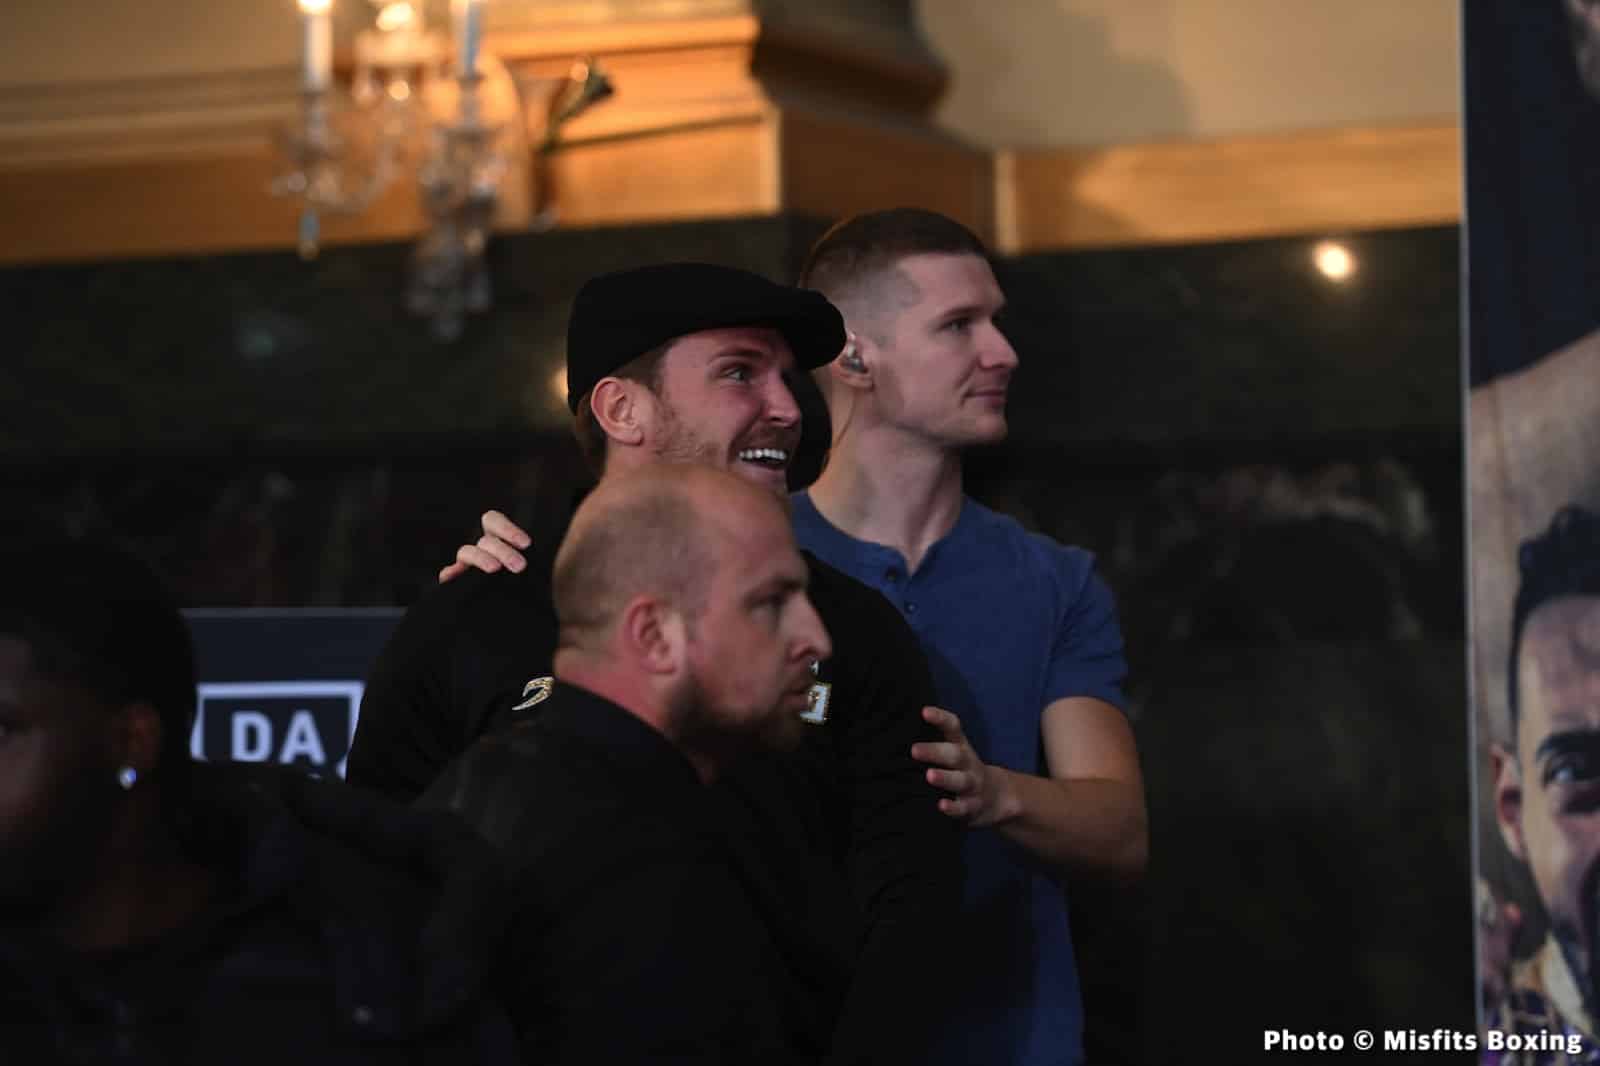 MF & DAZN: X SERIES 002 - Press Conference Quotes